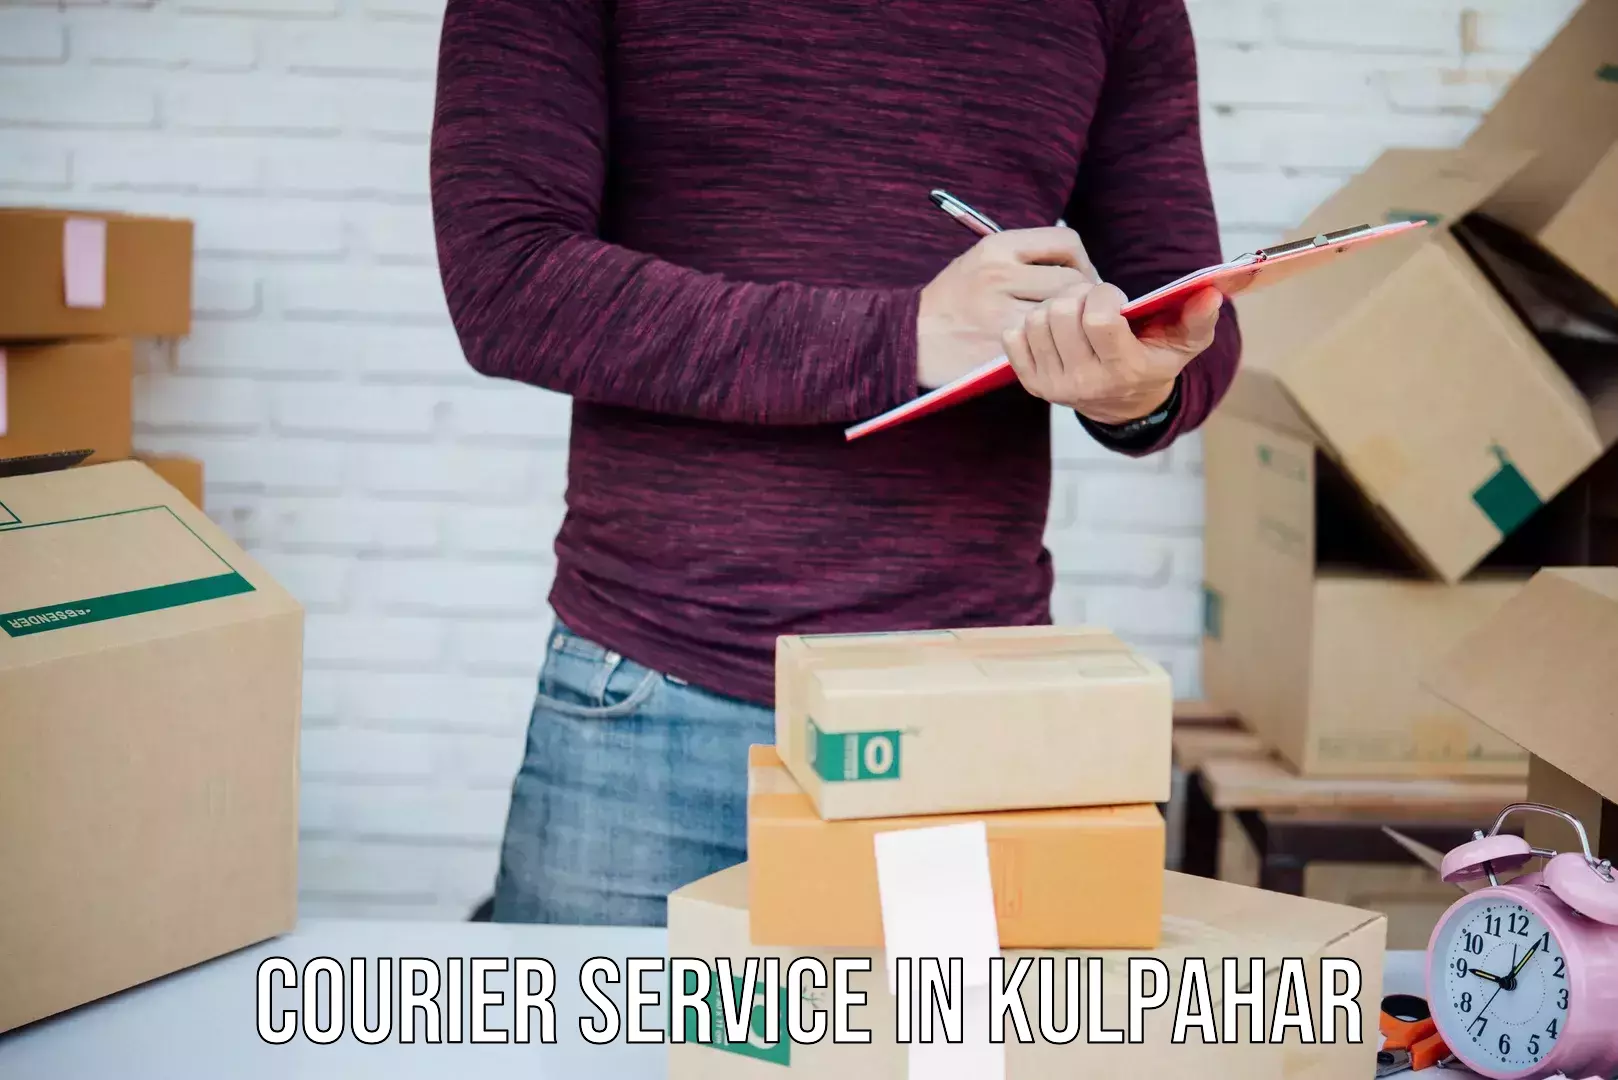 Automated parcel services in Kulpahar